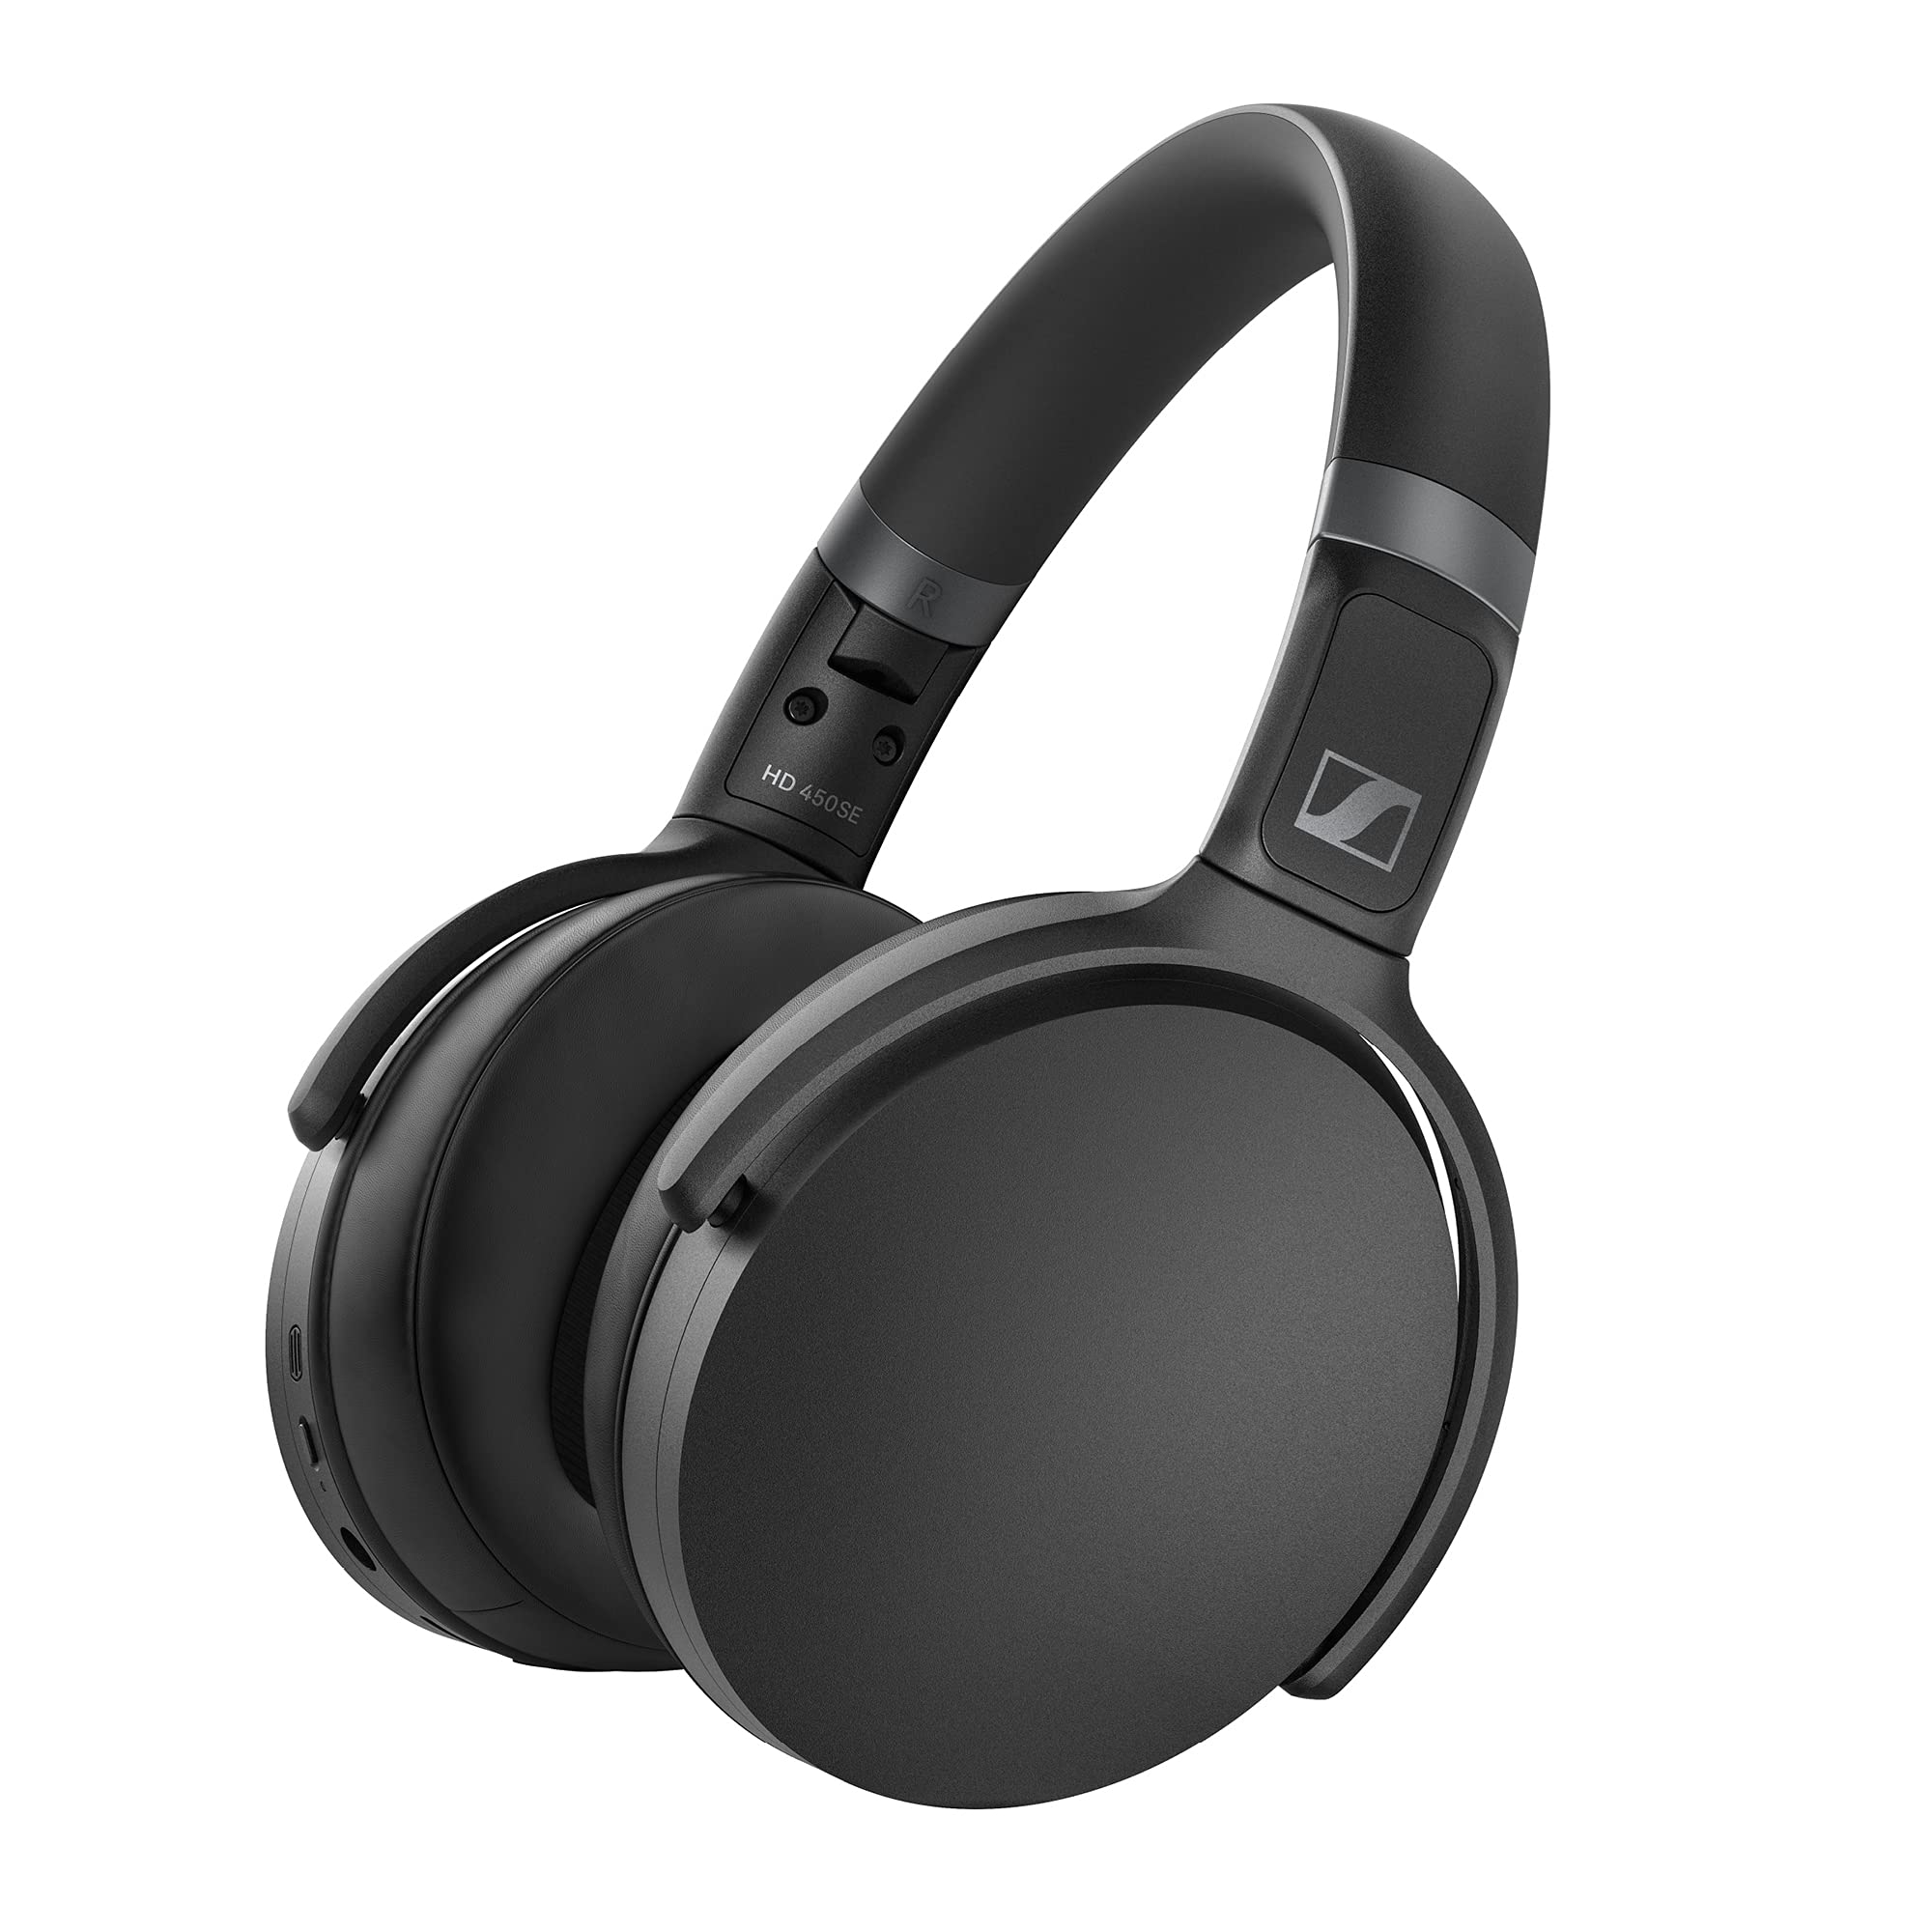 Sennheiser Consumer Audio HD 450SE Bluetooth 5.0 Wireless Headphone with Alexa Built-in - Active Noise Cancellation, 30-Hour Battery Life, USB-C Fast Charging, Foldable - Black